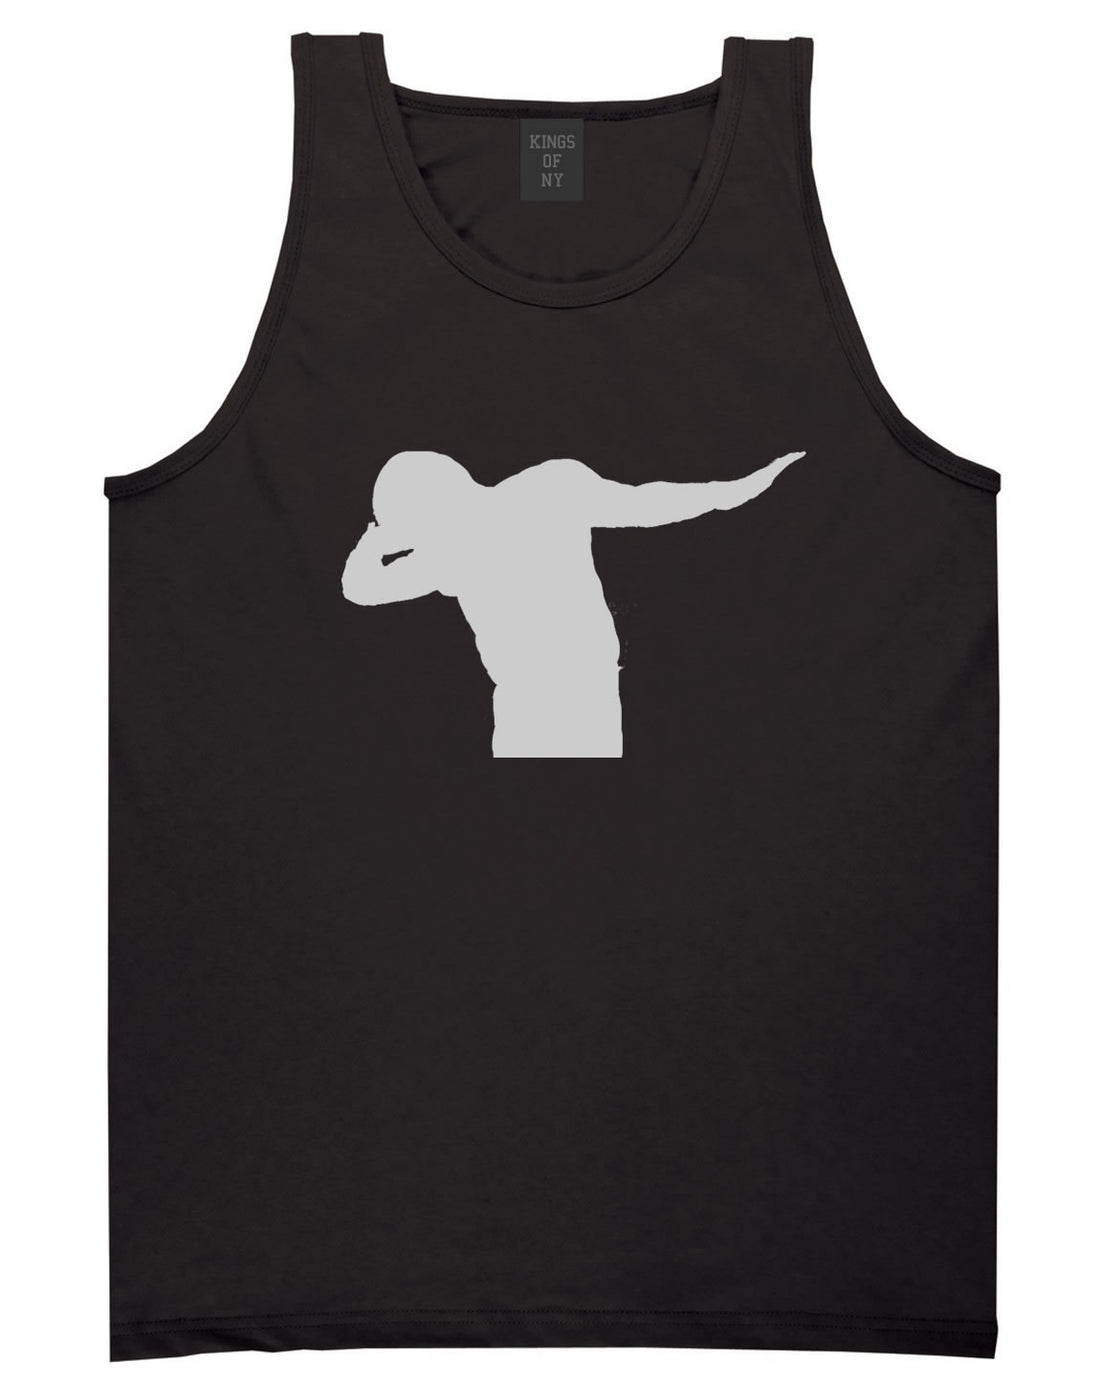 Dab On Em Football Tank Top by Kings Of NY